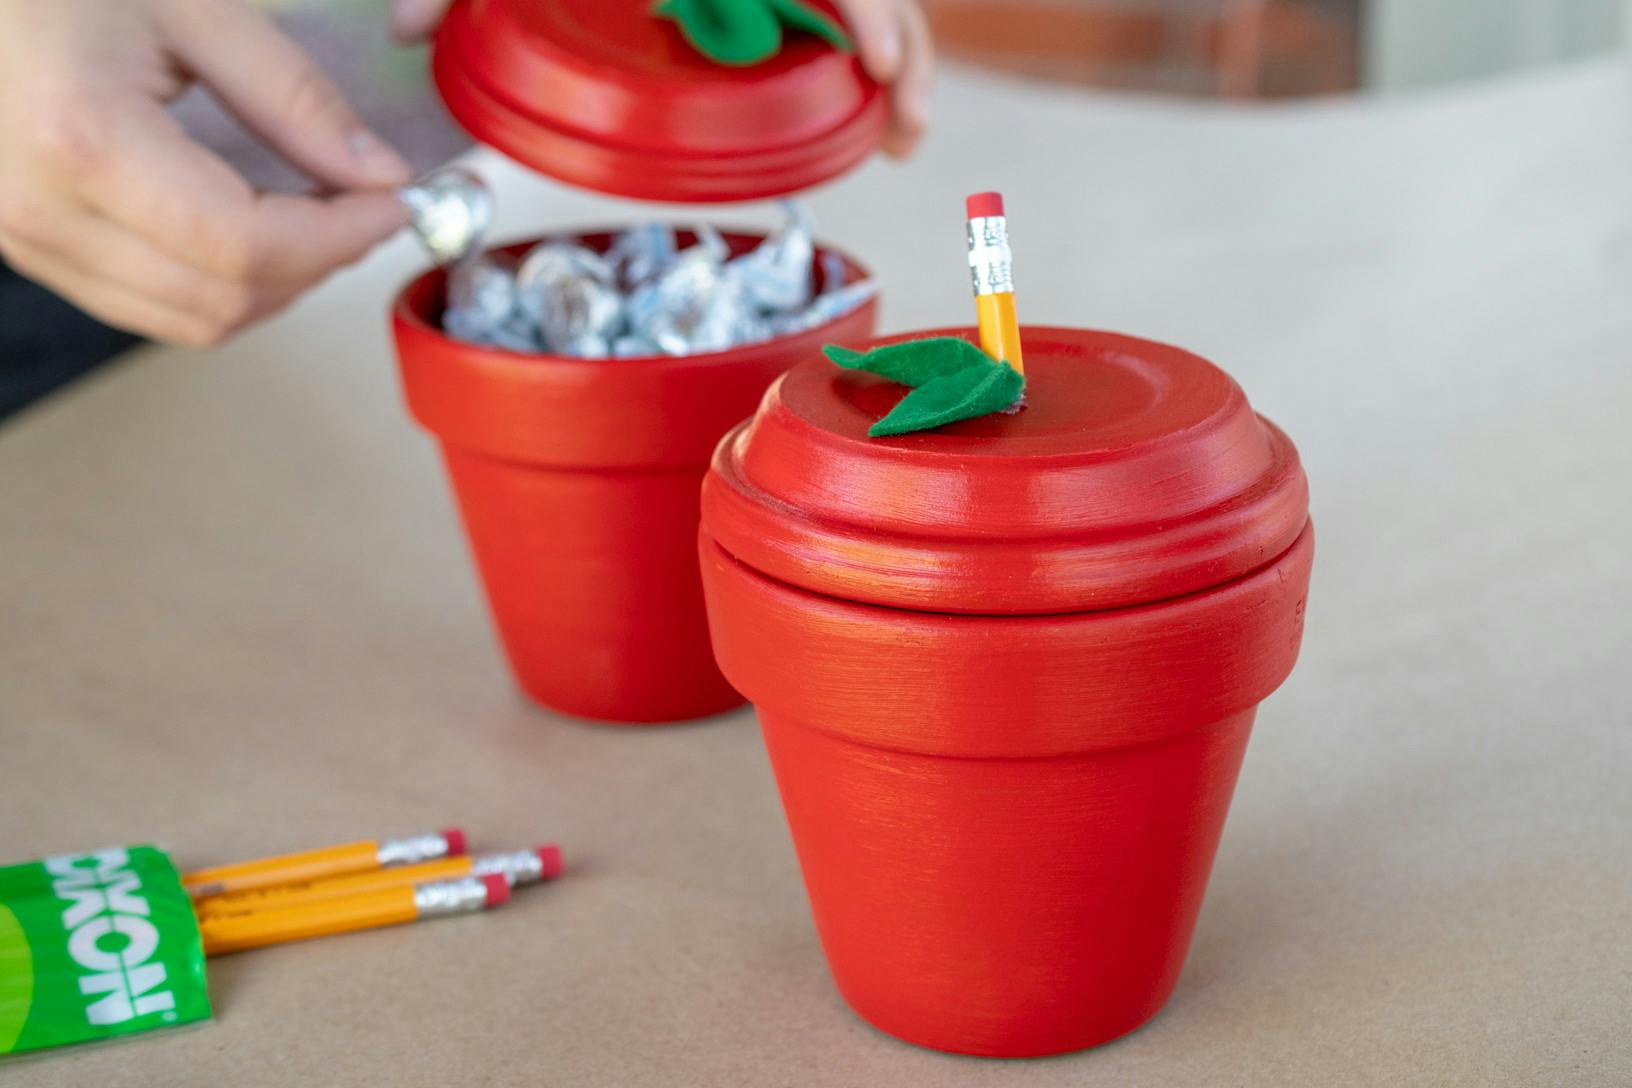 Person grabbing a small candy out of one if two small terra cotta pots painted red with a leaf and pencil end glued to the lids to resemble an apple.